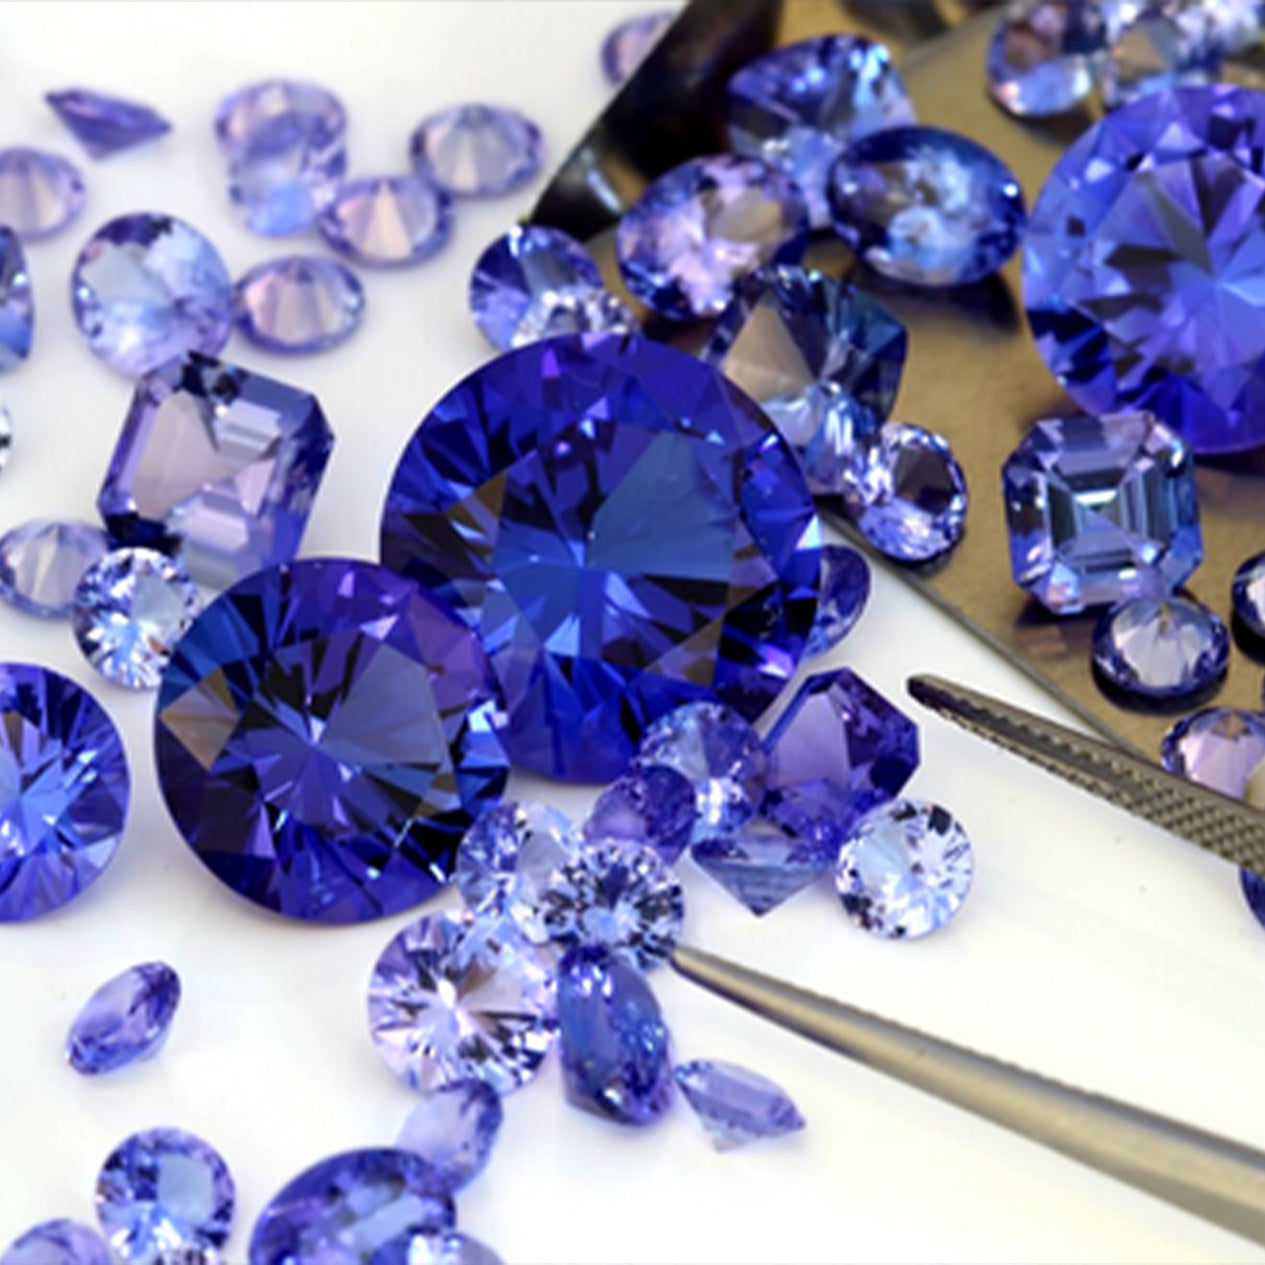 An assortment of shaped and cut loose Tanzanite gems